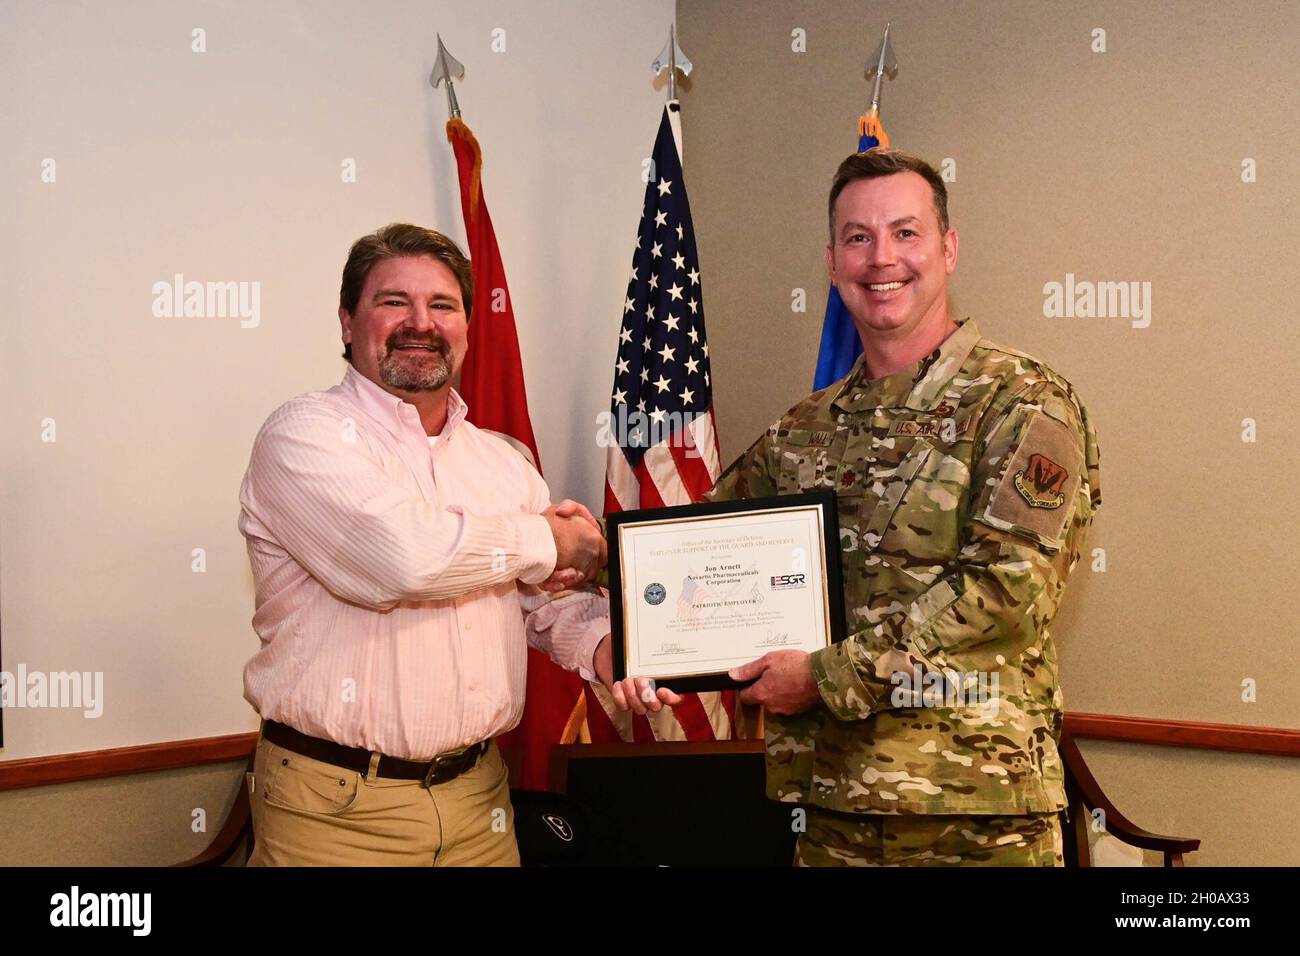 Jon Arnette, Regional Director, Systems of Care, with Novartis Pharmaceuticals Corporation, receives the Employer Support of the Guard and Reserve (ESGR) Patriot Award at the 118th Wing Air National Guard Base in Nashville, Tenn., on Jan. 14, 2021. The patriot award is given to individual supervisors for support provided to citizen/warriors in the form of flexible schedules, time off prior to and after deployment, caring for families, and granting leave of absence if needed. Stock Photo